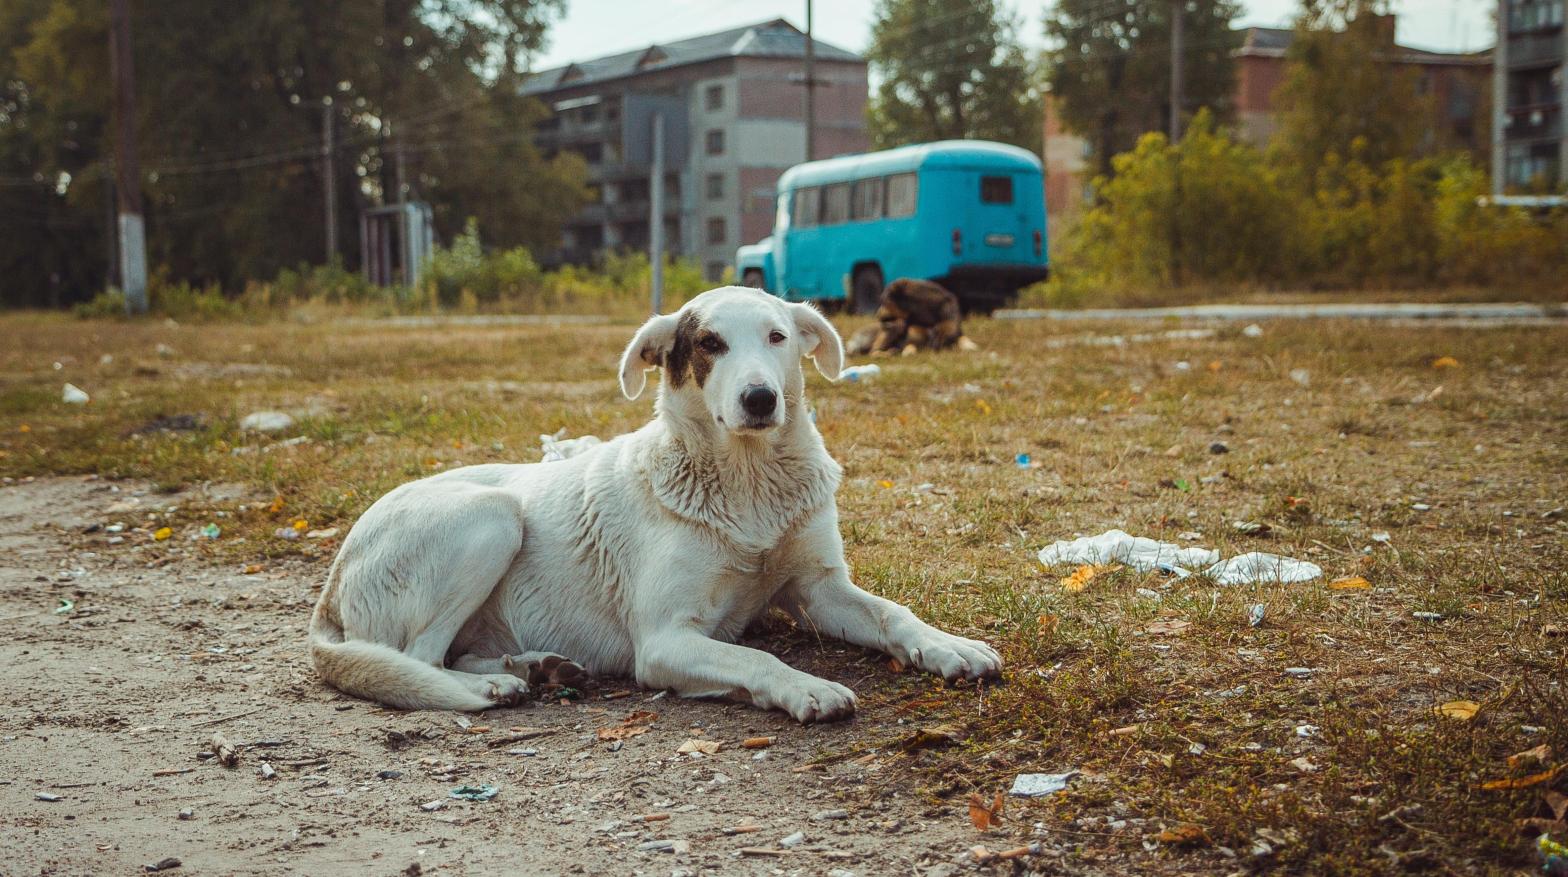 A wild dog purportedly photographed in the abandoned city of Pripyat. (Photo: Sergiy Romanyuk, Shutterstock)